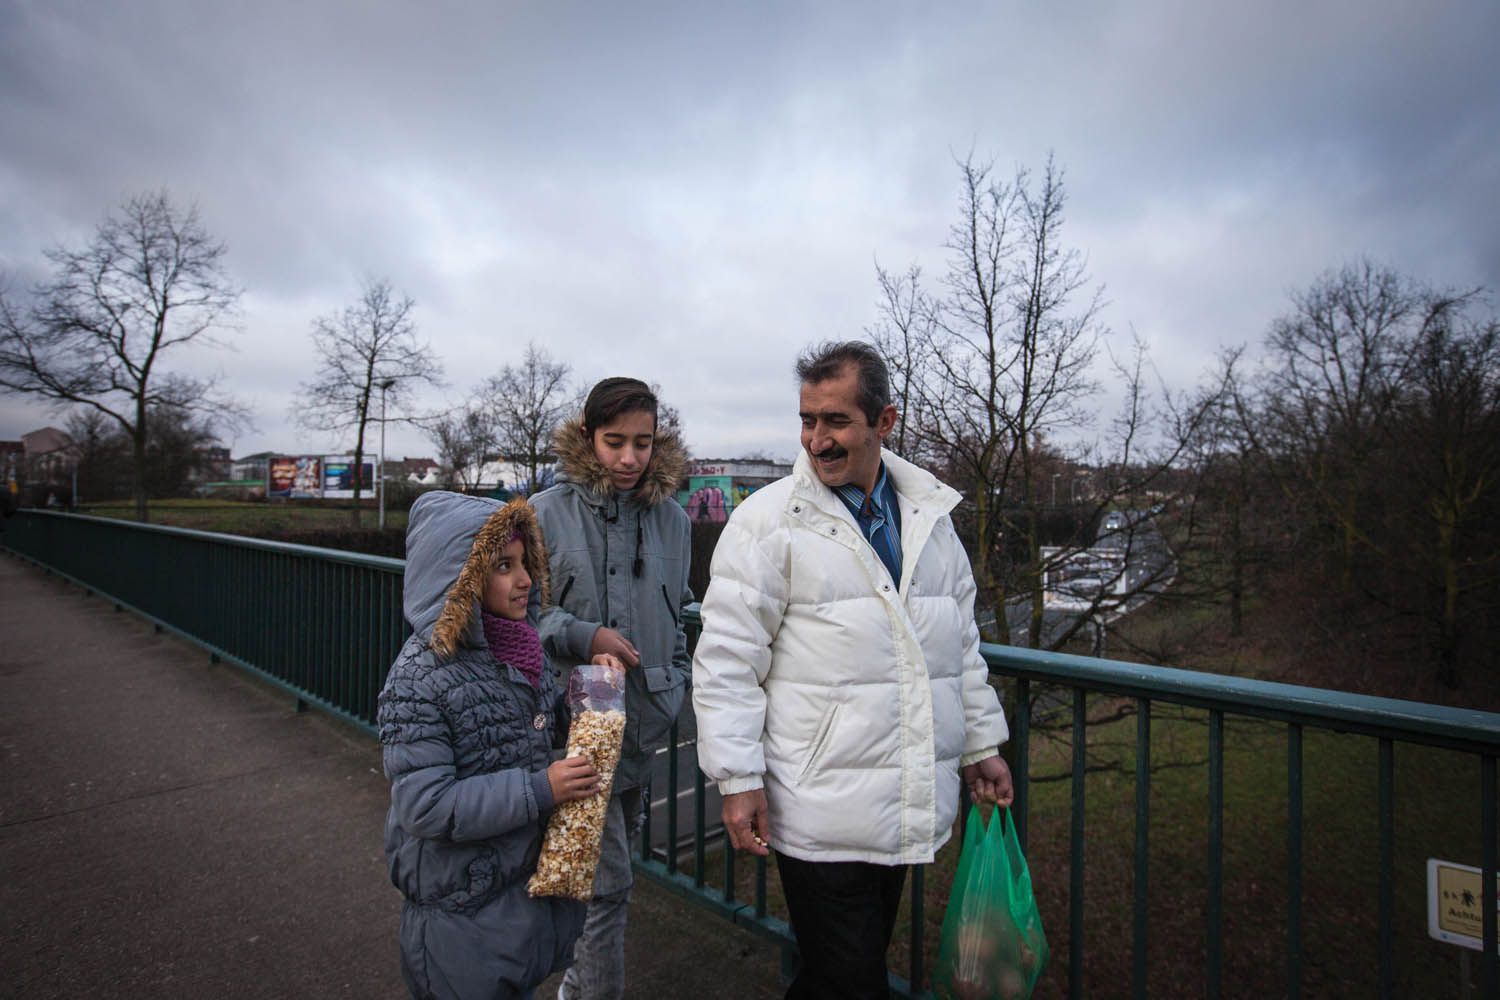 In December 2016 the family had their final interview with government officials as part of their asylum-application process. As of press time they were still awaiting a decision. Image by Diana Markosian. Germany, 2017.